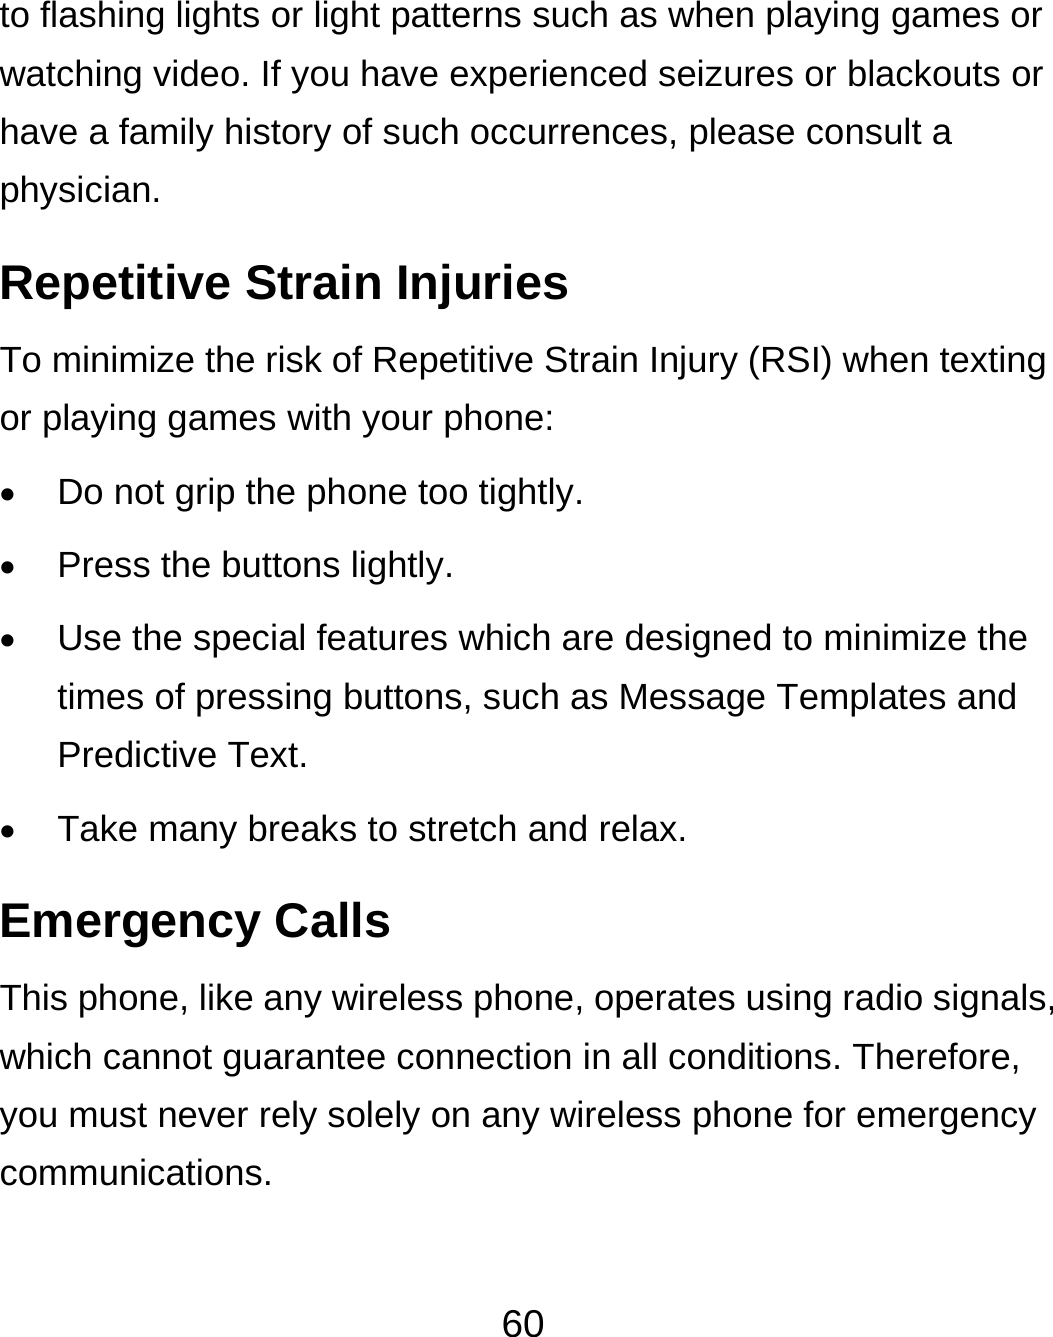  60 to flashing lights or light patterns such as when playing games or watching video. If you have experienced seizures or blackouts or have a family history of such occurrences, please consult a physician. Repetitive Strain Injuries To minimize the risk of Repetitive Strain Injury (RSI) when texting or playing games with your phone:  Do not grip the phone too tightly.  Press the buttons lightly.  Use the special features which are designed to minimize the times of pressing buttons, such as Message Templates and Predictive Text.  Take many breaks to stretch and relax. Emergency Calls This phone, like any wireless phone, operates using radio signals, which cannot guarantee connection in all conditions. Therefore, you must never rely solely on any wireless phone for emergency communications. 